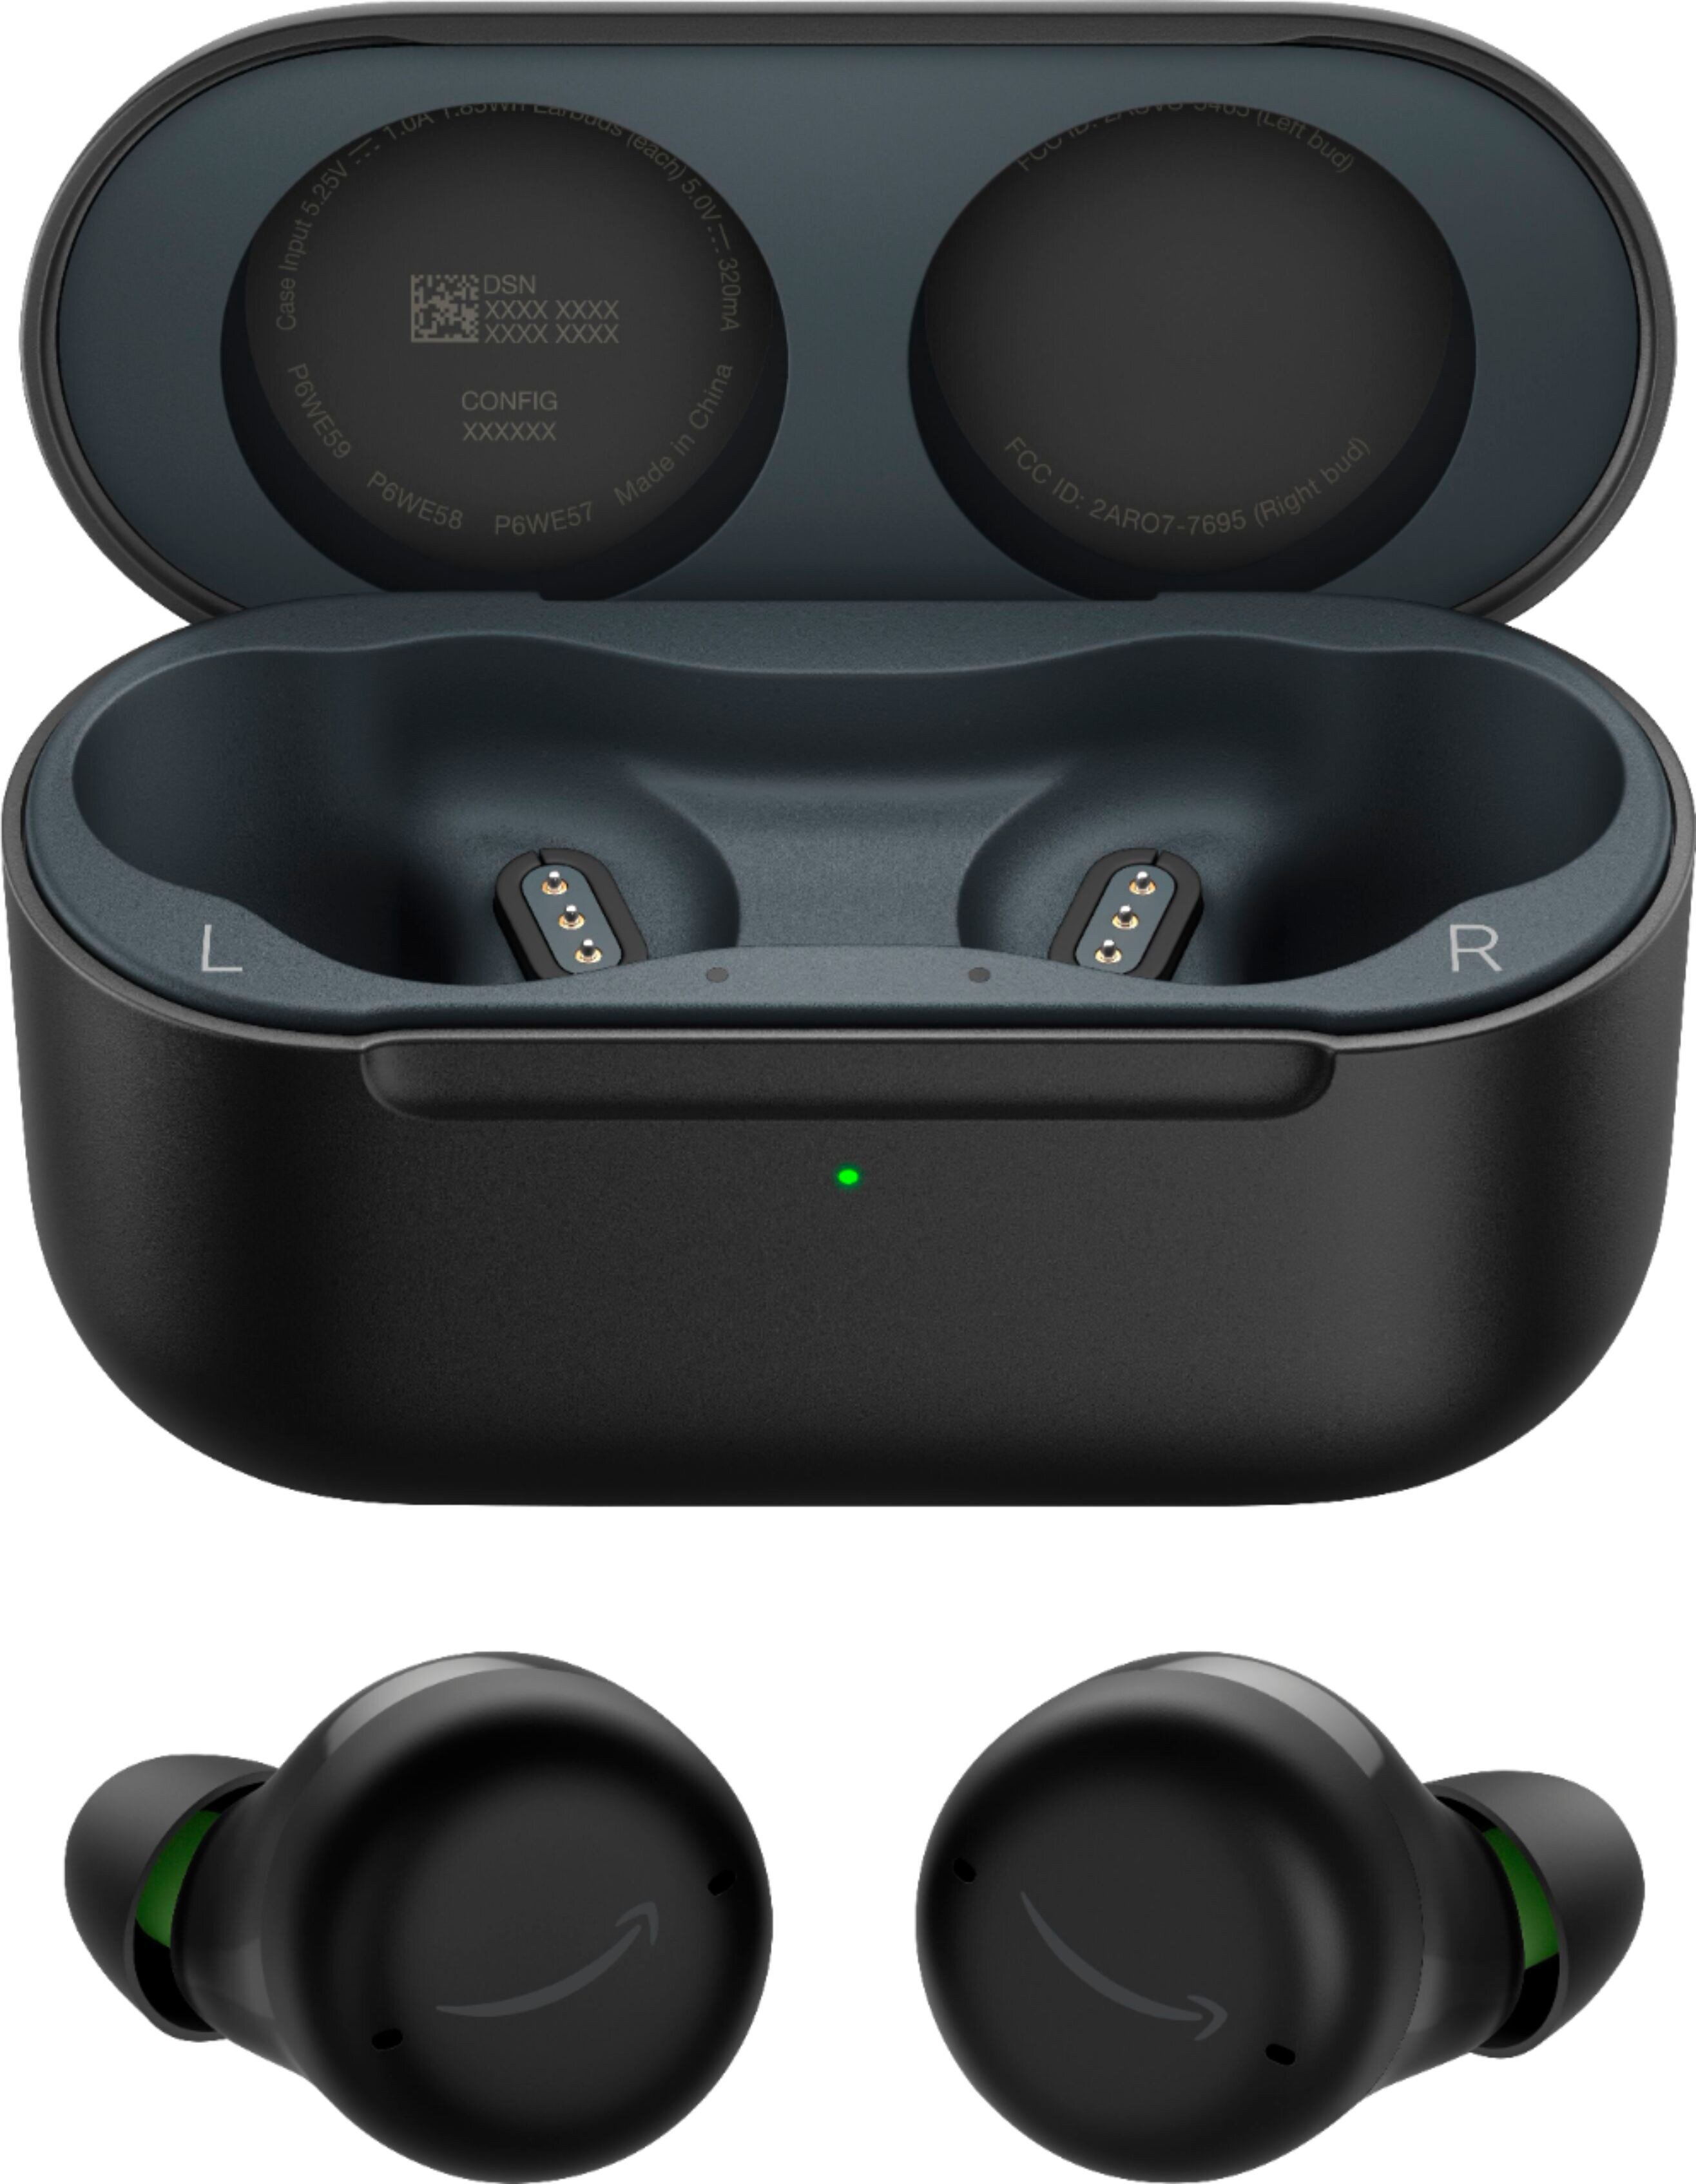 https://www.tejar.pk/media/catalog/product/cache/3/image/9df78eab33525d08d6e5fb8d27136e95/a/m/amazon_echo_buds_2nd_gen_wireless_earbuds_with_active_noise_cancellation_and_alexa_1-_tejar.jpg